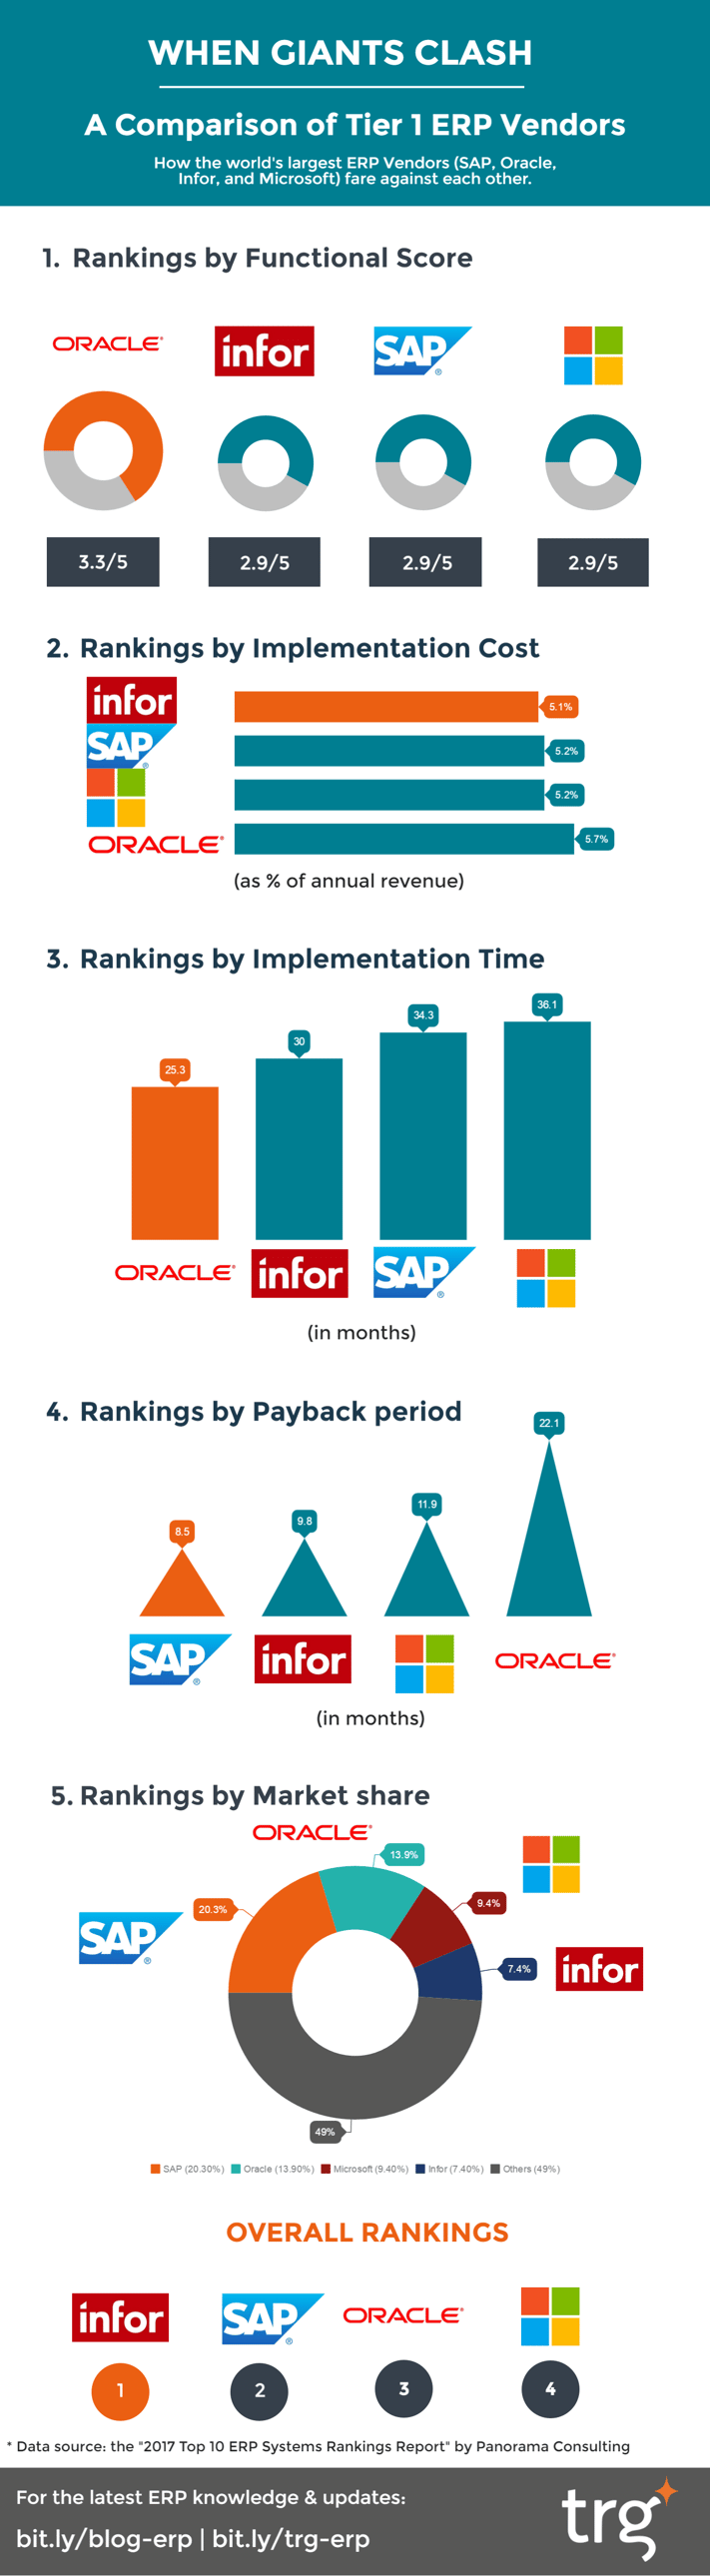 A comparison of tier 1 ERP vendors: SAP, Oracle, Infor and Microsoft Dynamics